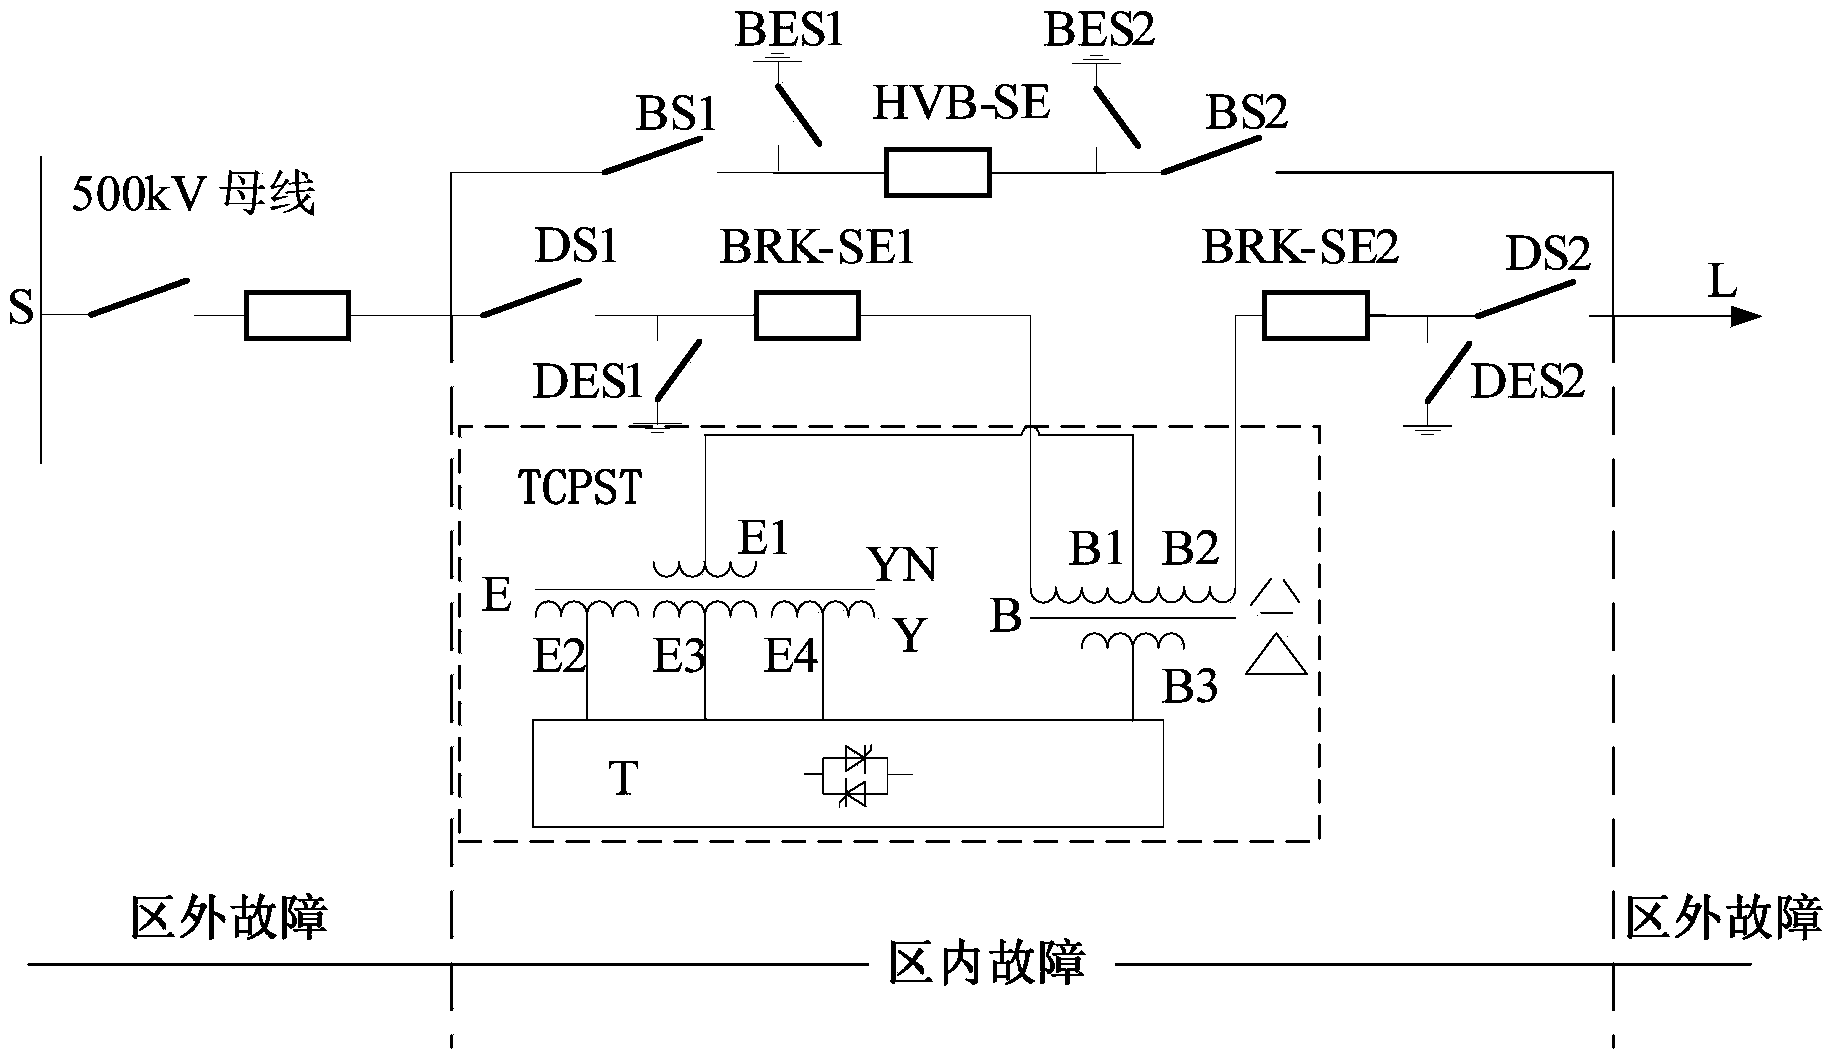 Control and protection system for thyristor controlled phase shifter of supergrid